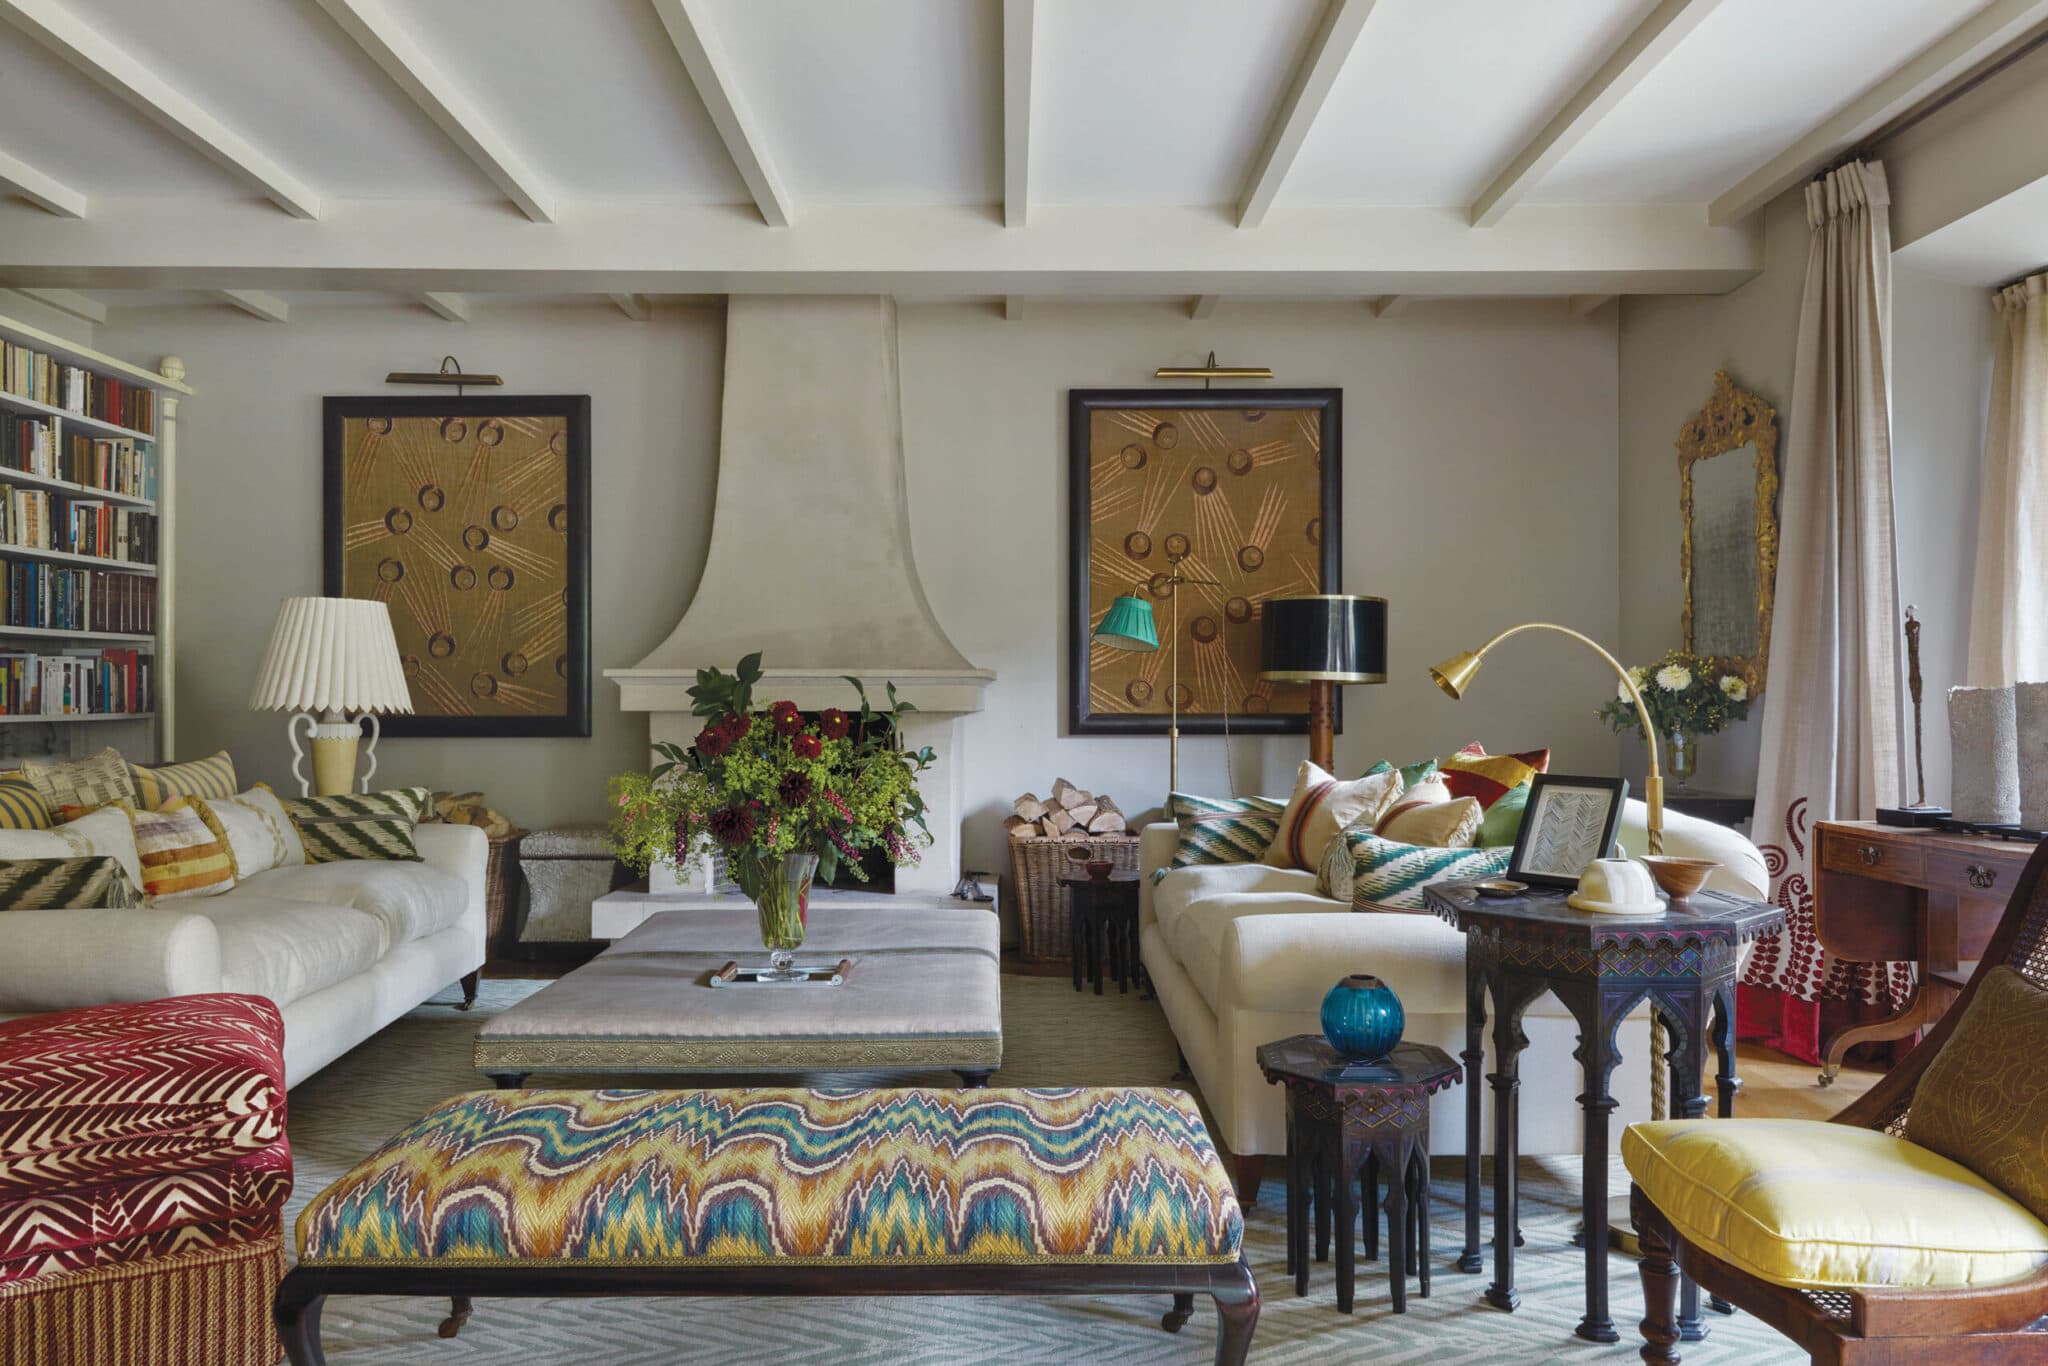 Go Inside a Restored London Carriage House – Frederic Magazine